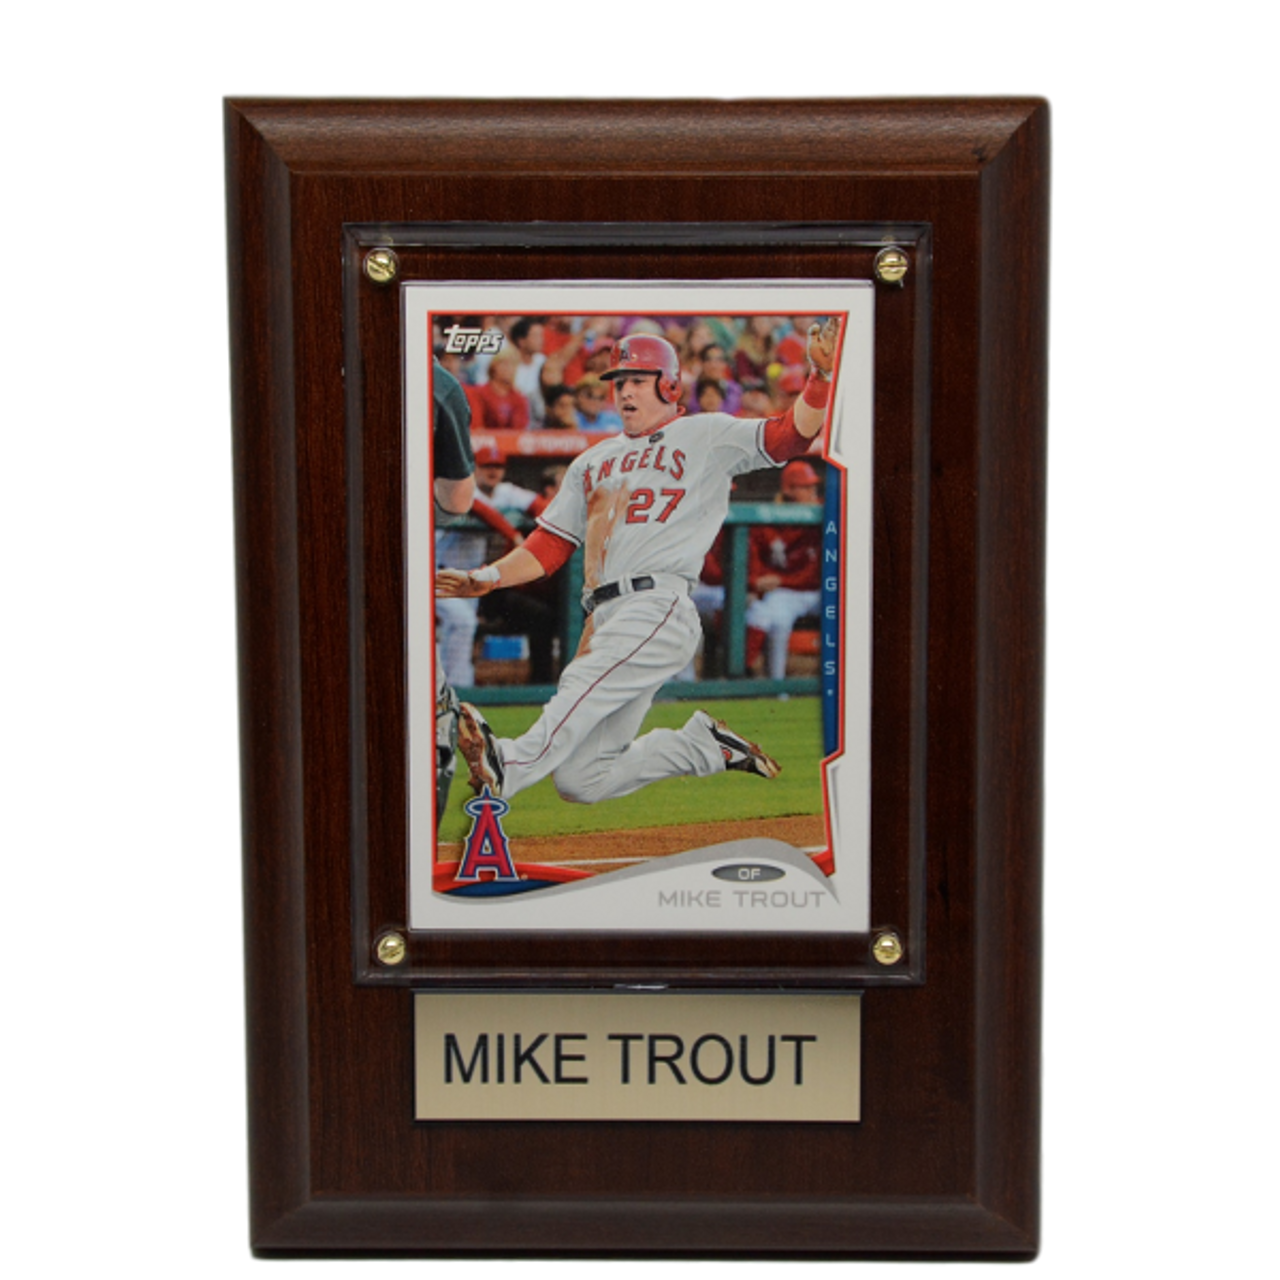 Mike Trout Signed Los Angeles White Baseball Jersey The Kiiid